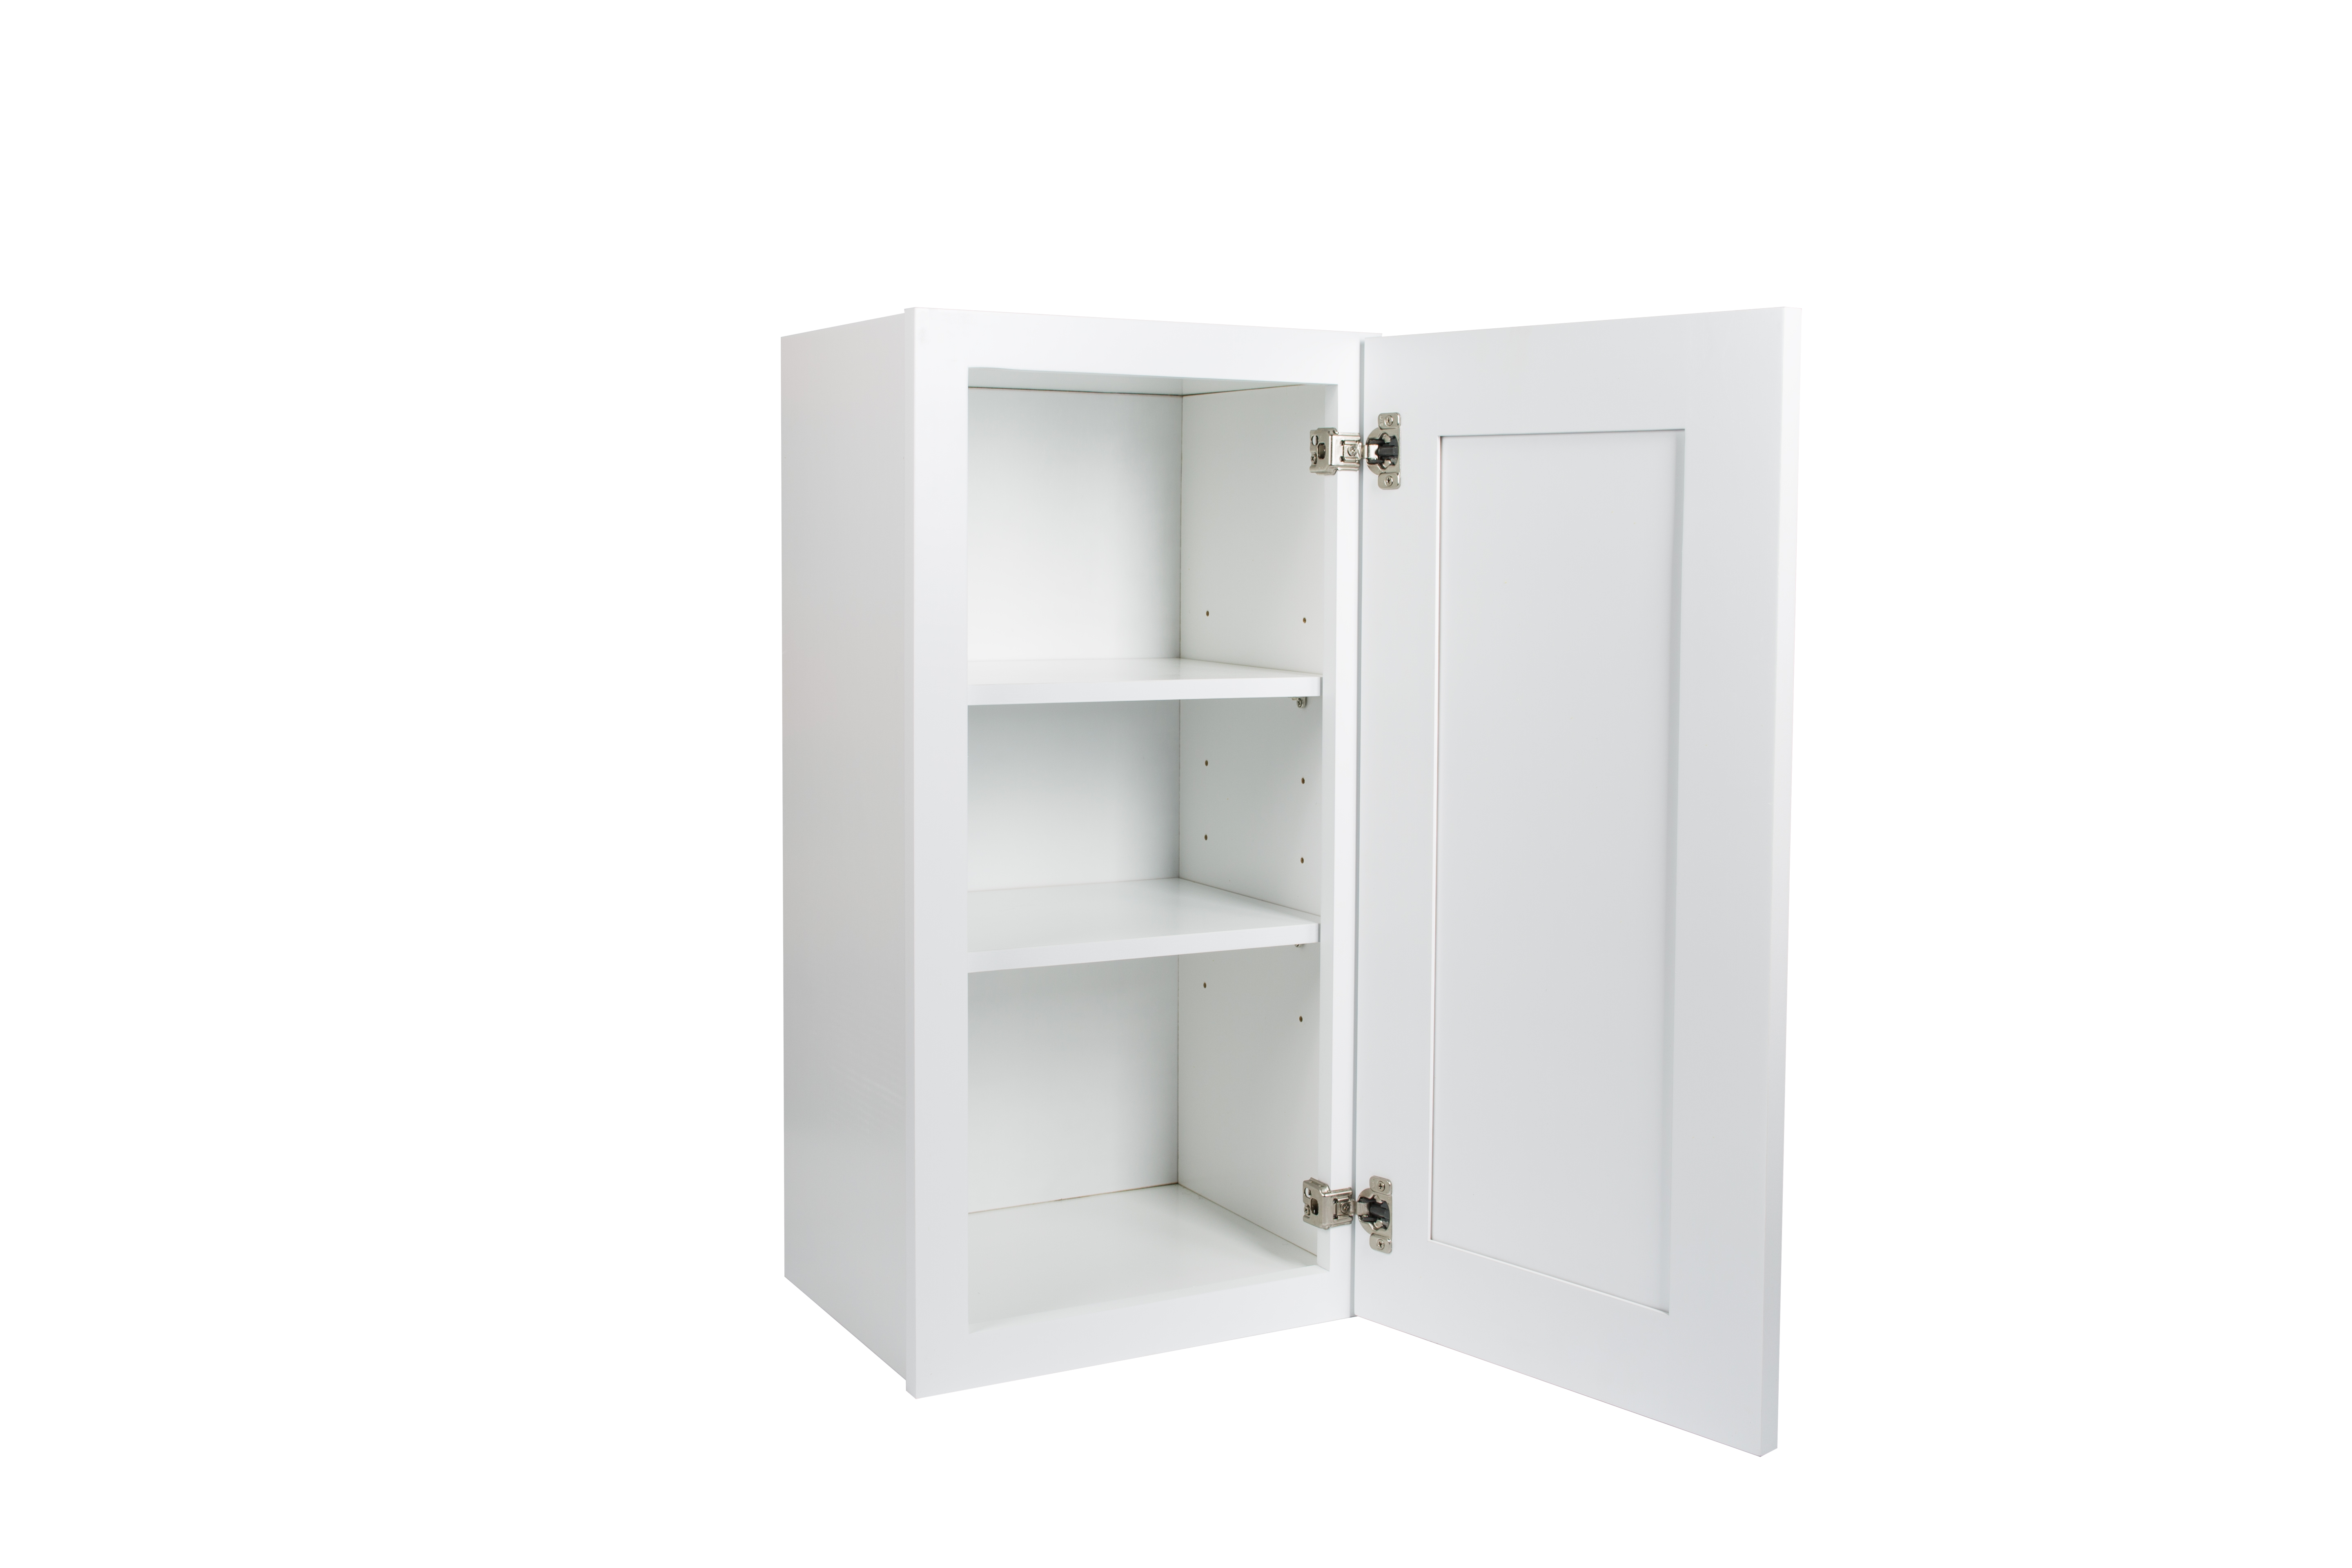 Ready to Assemble 12x42x12 in. Shaker Wall Cabinet with 1-Door and Adjustable Shelves in White